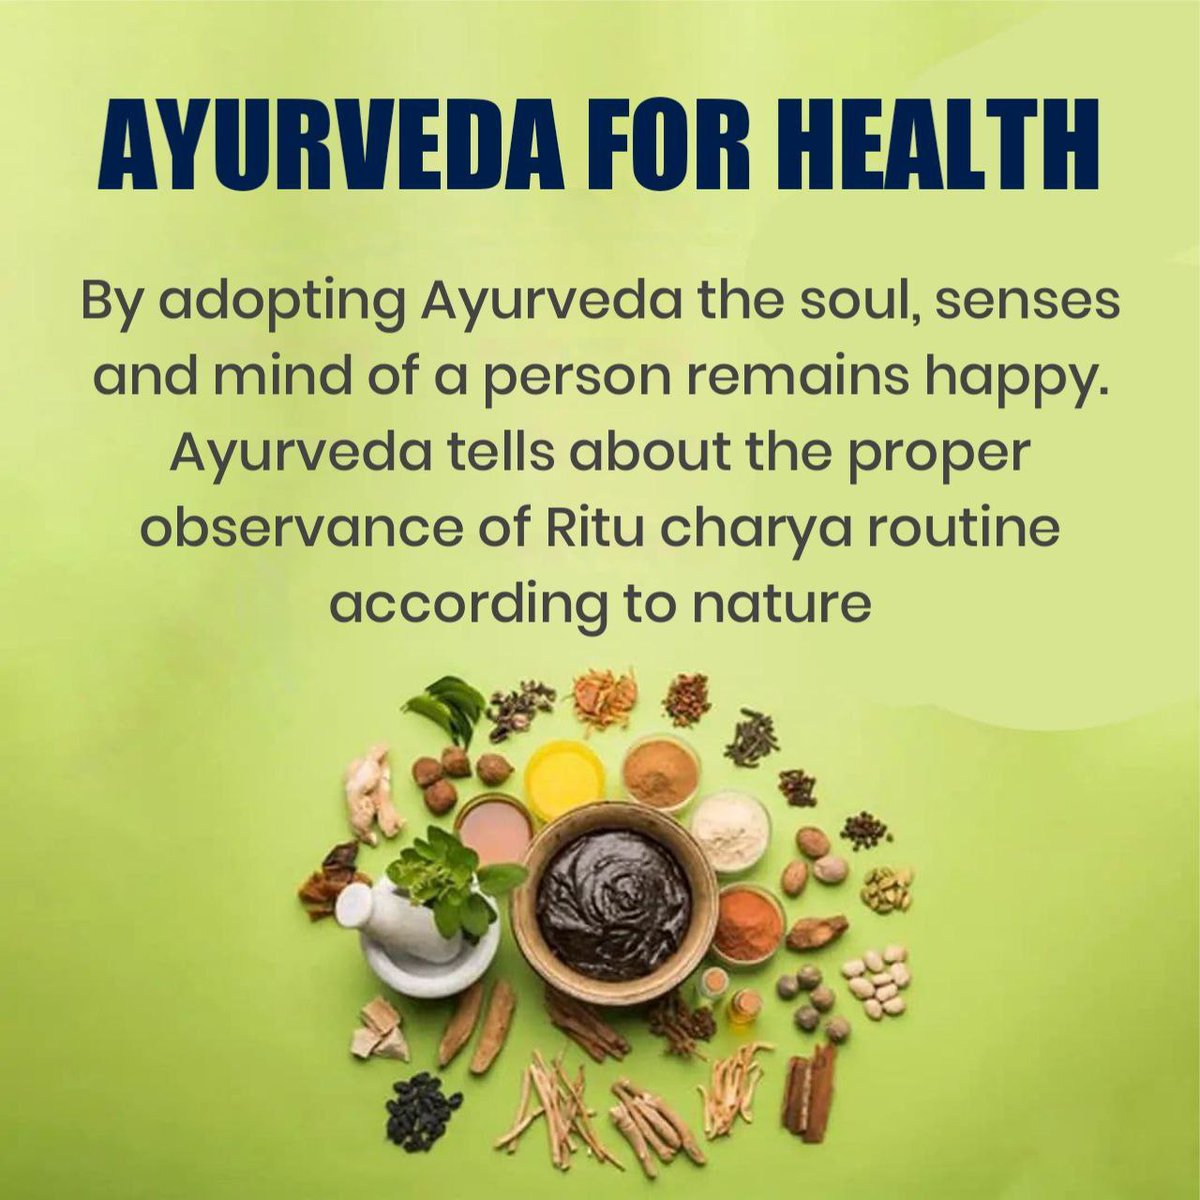 Sant Shri Asharamji Bapu always stressed on Ayuvedic procedures for Healthy Living , because it's the only way to  Wellness Journey and long life. 
Let's follow Ayurveda in our life
#आयुर्वेदामृत